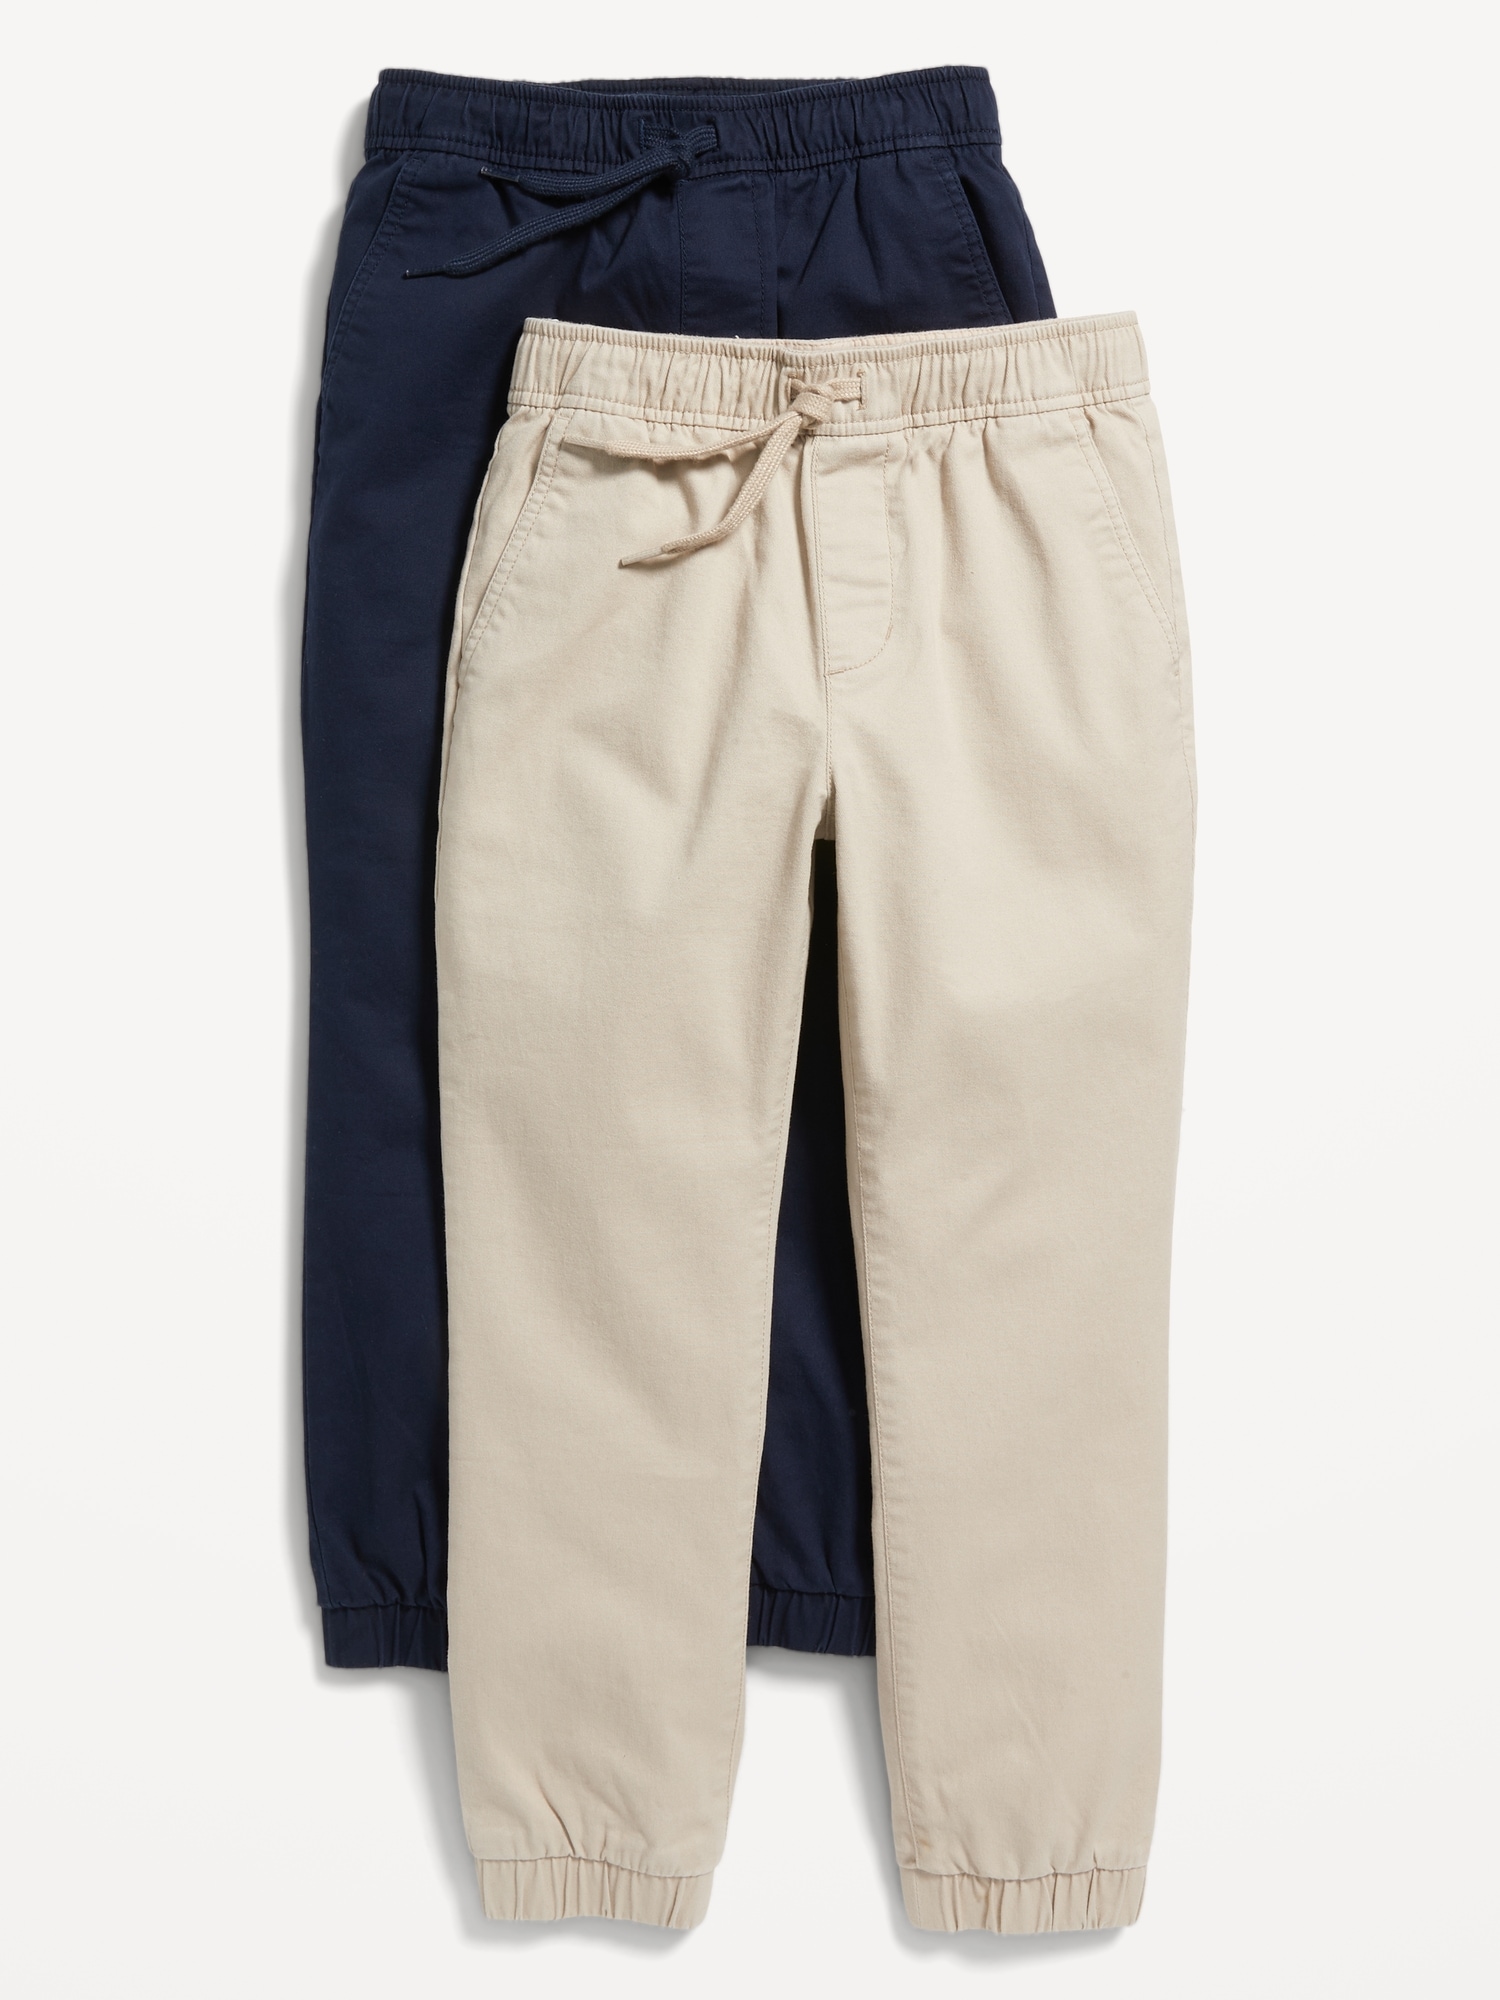 Old Navy Built-In Flex Twill Jogger Pants for Boys blue. 1